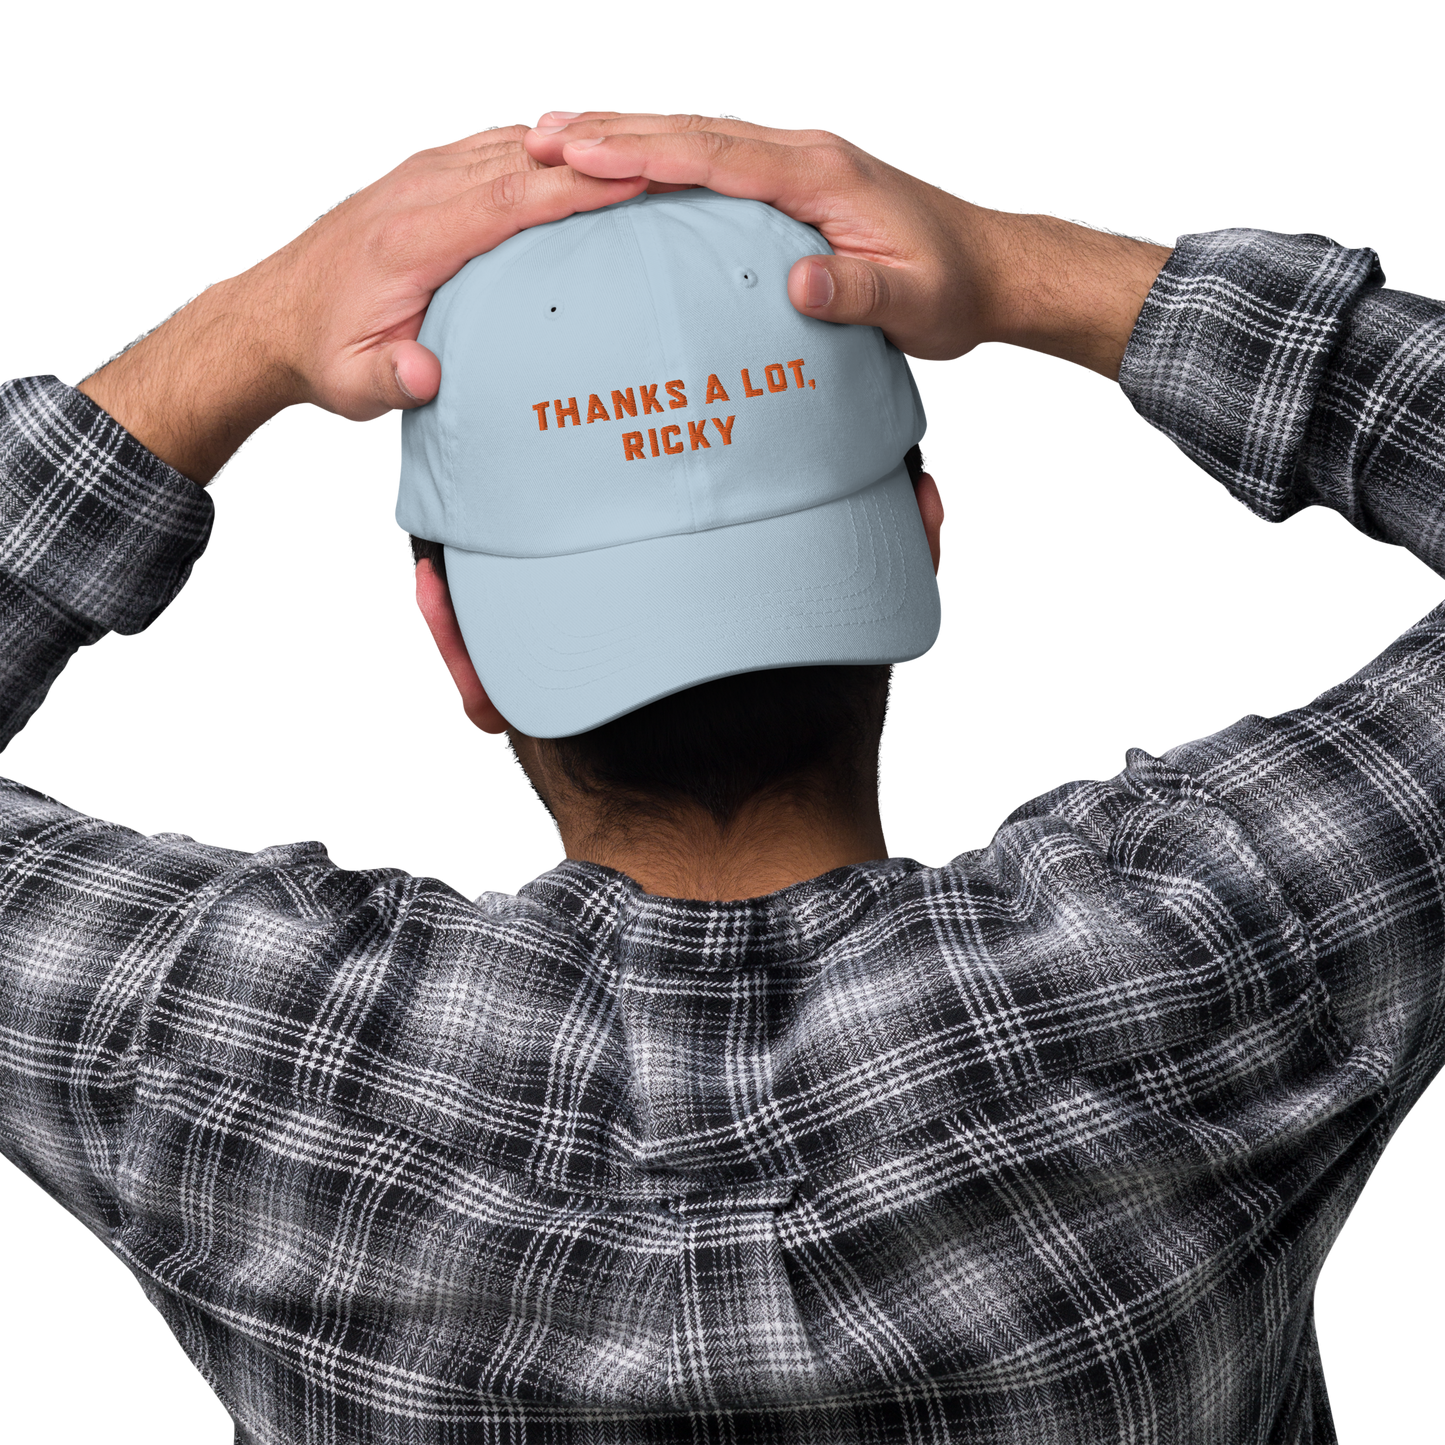 Asteroid City Thanks A Lot, Ricky Dad Hat